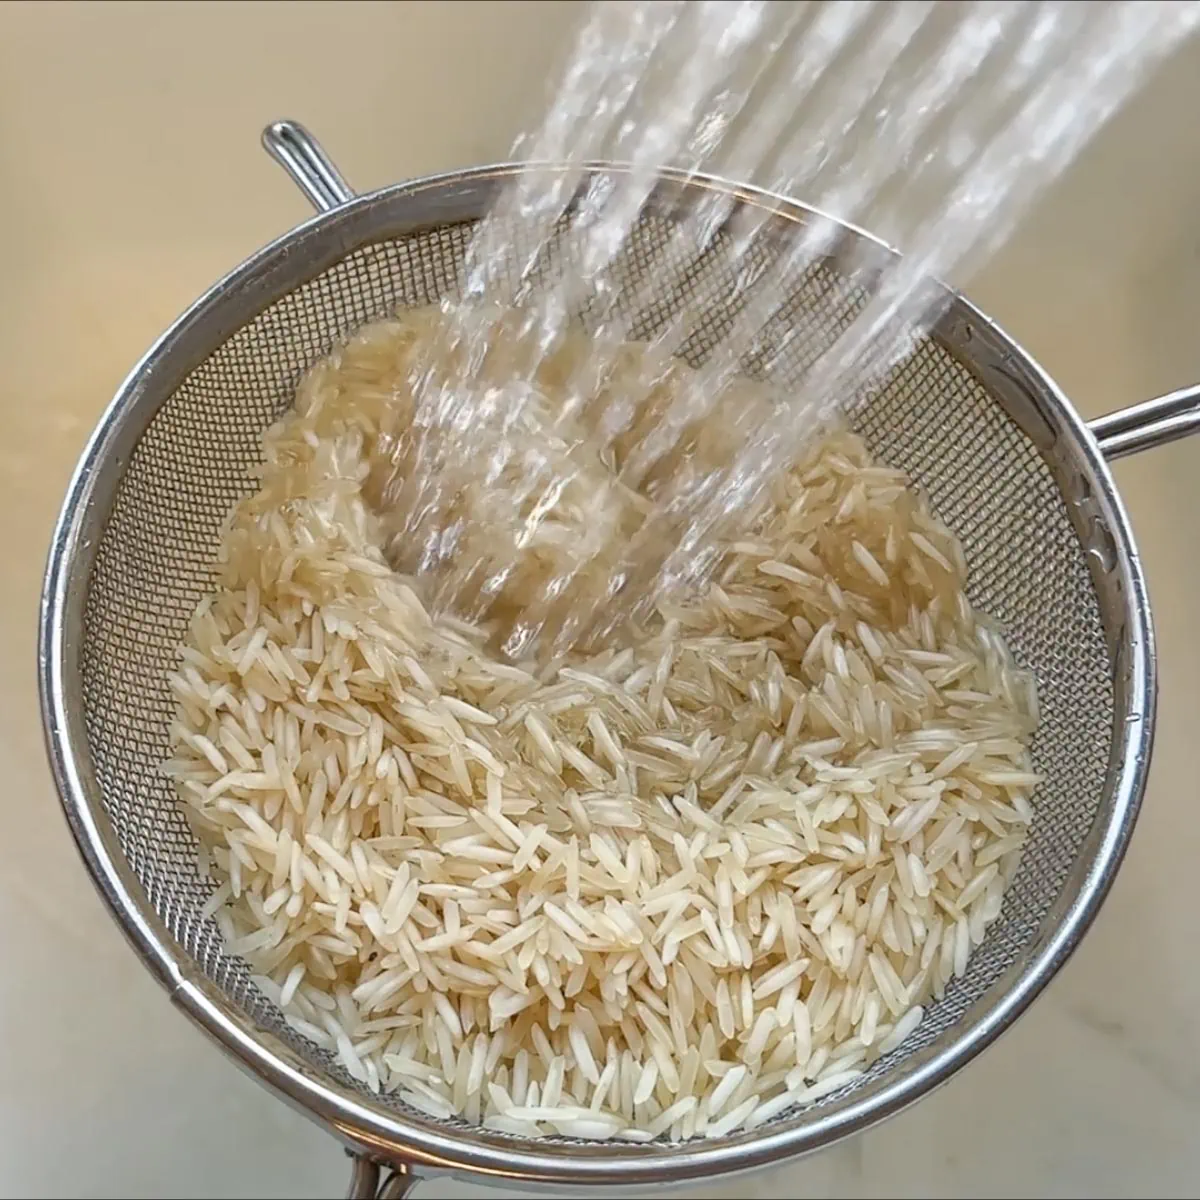 wash the rice in a strainer